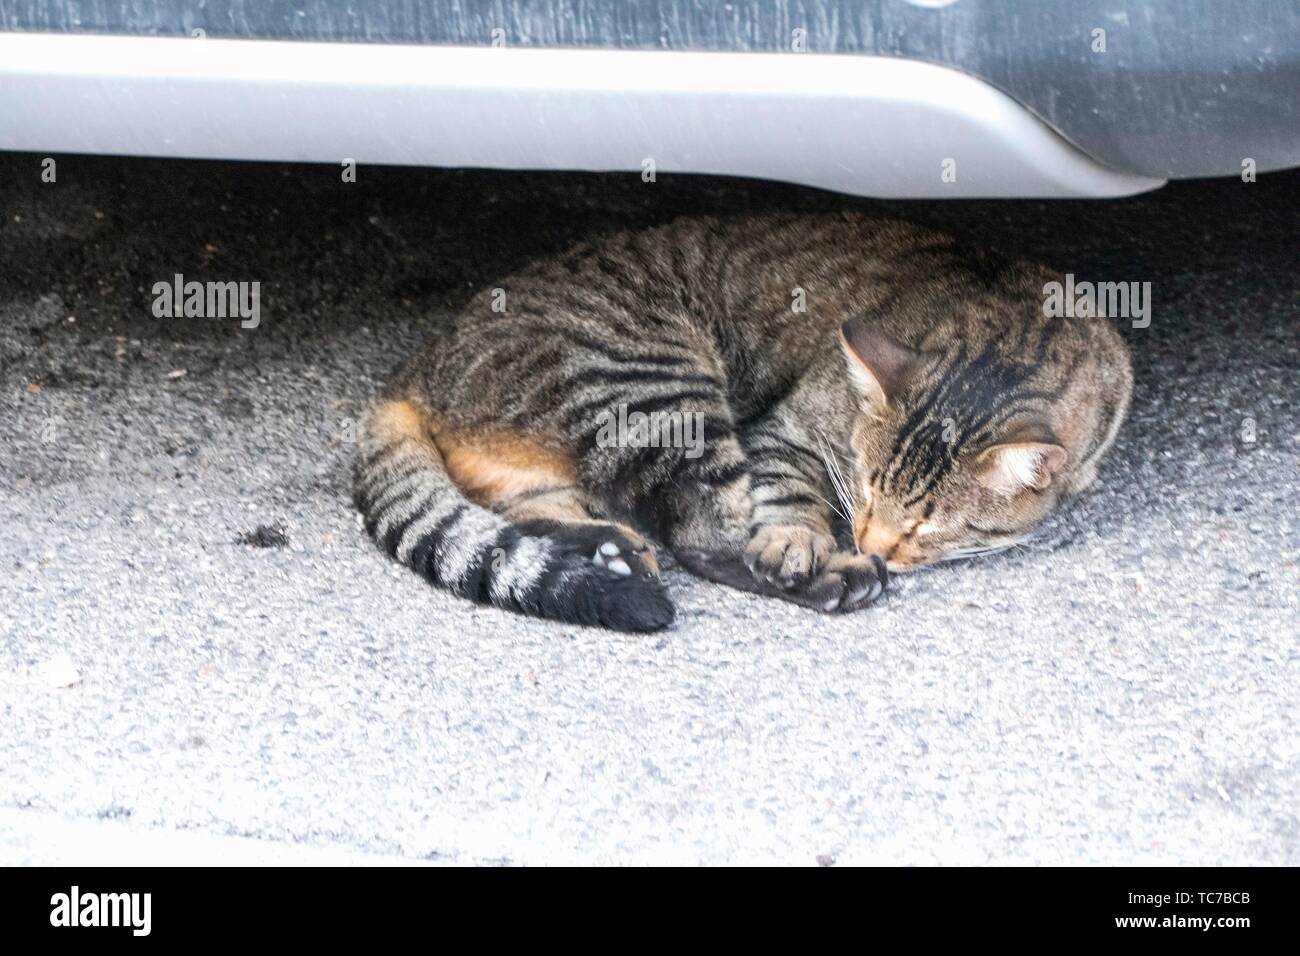 Stripy, tortoiseshell cat with ginger undertones curled up asleep on the grey tarmac underneath a car bumper in L'Isle-sur-la-Sorgue, Vaucluse, Stock Photo